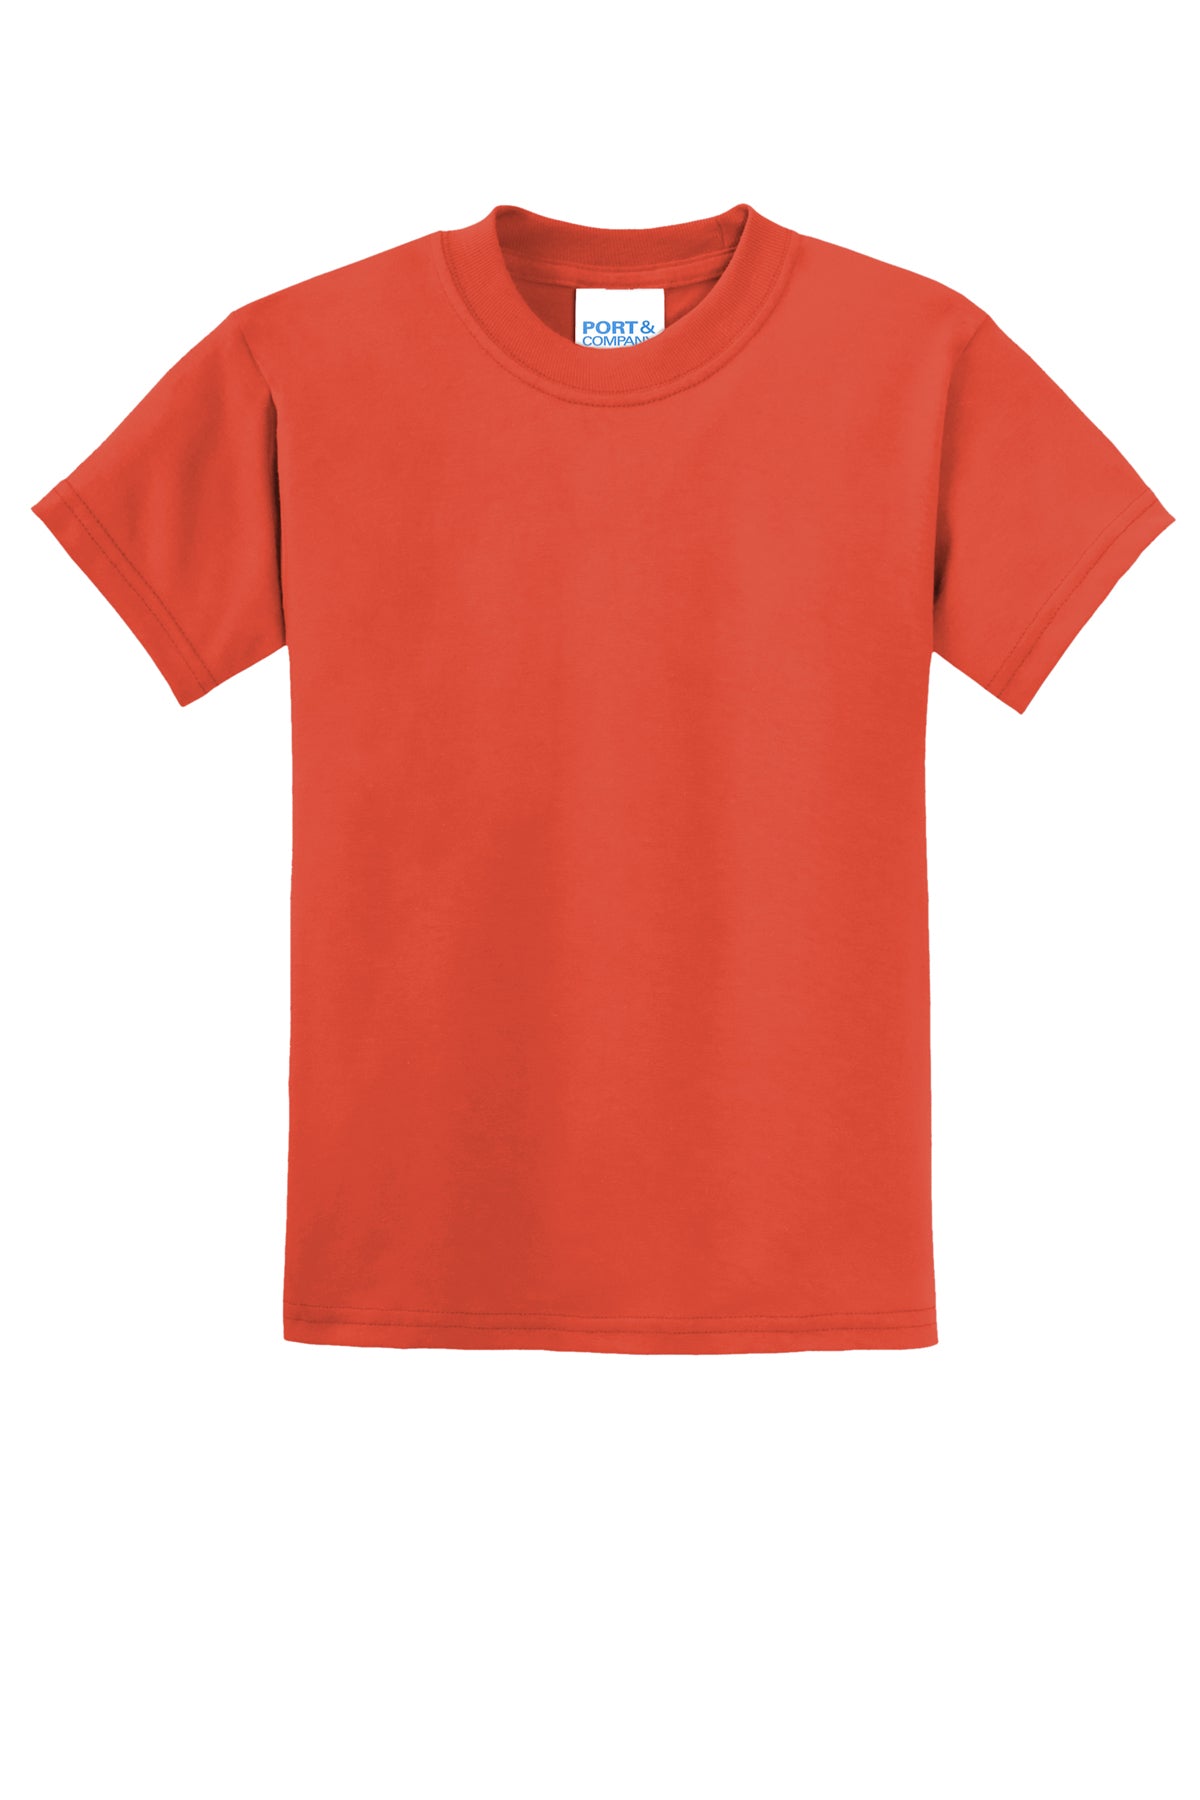 PC55Y Port & Company® Youth Core Blend Tee. XS-XL